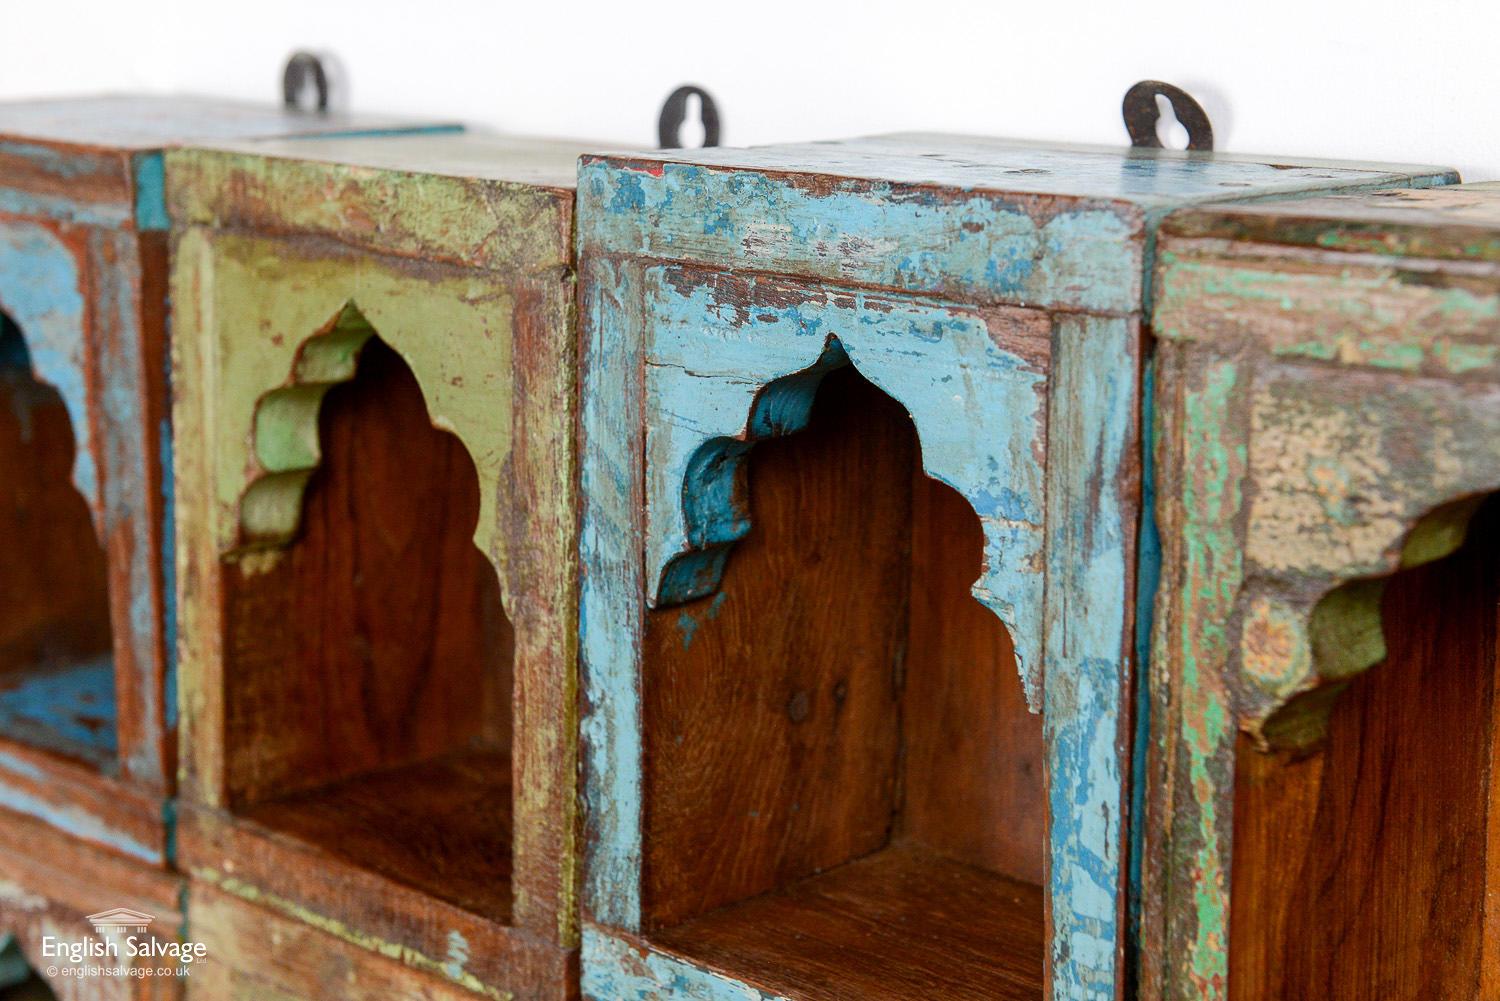 Indian Painted Wooden Single Wall Niches, 20th Century For Sale 3